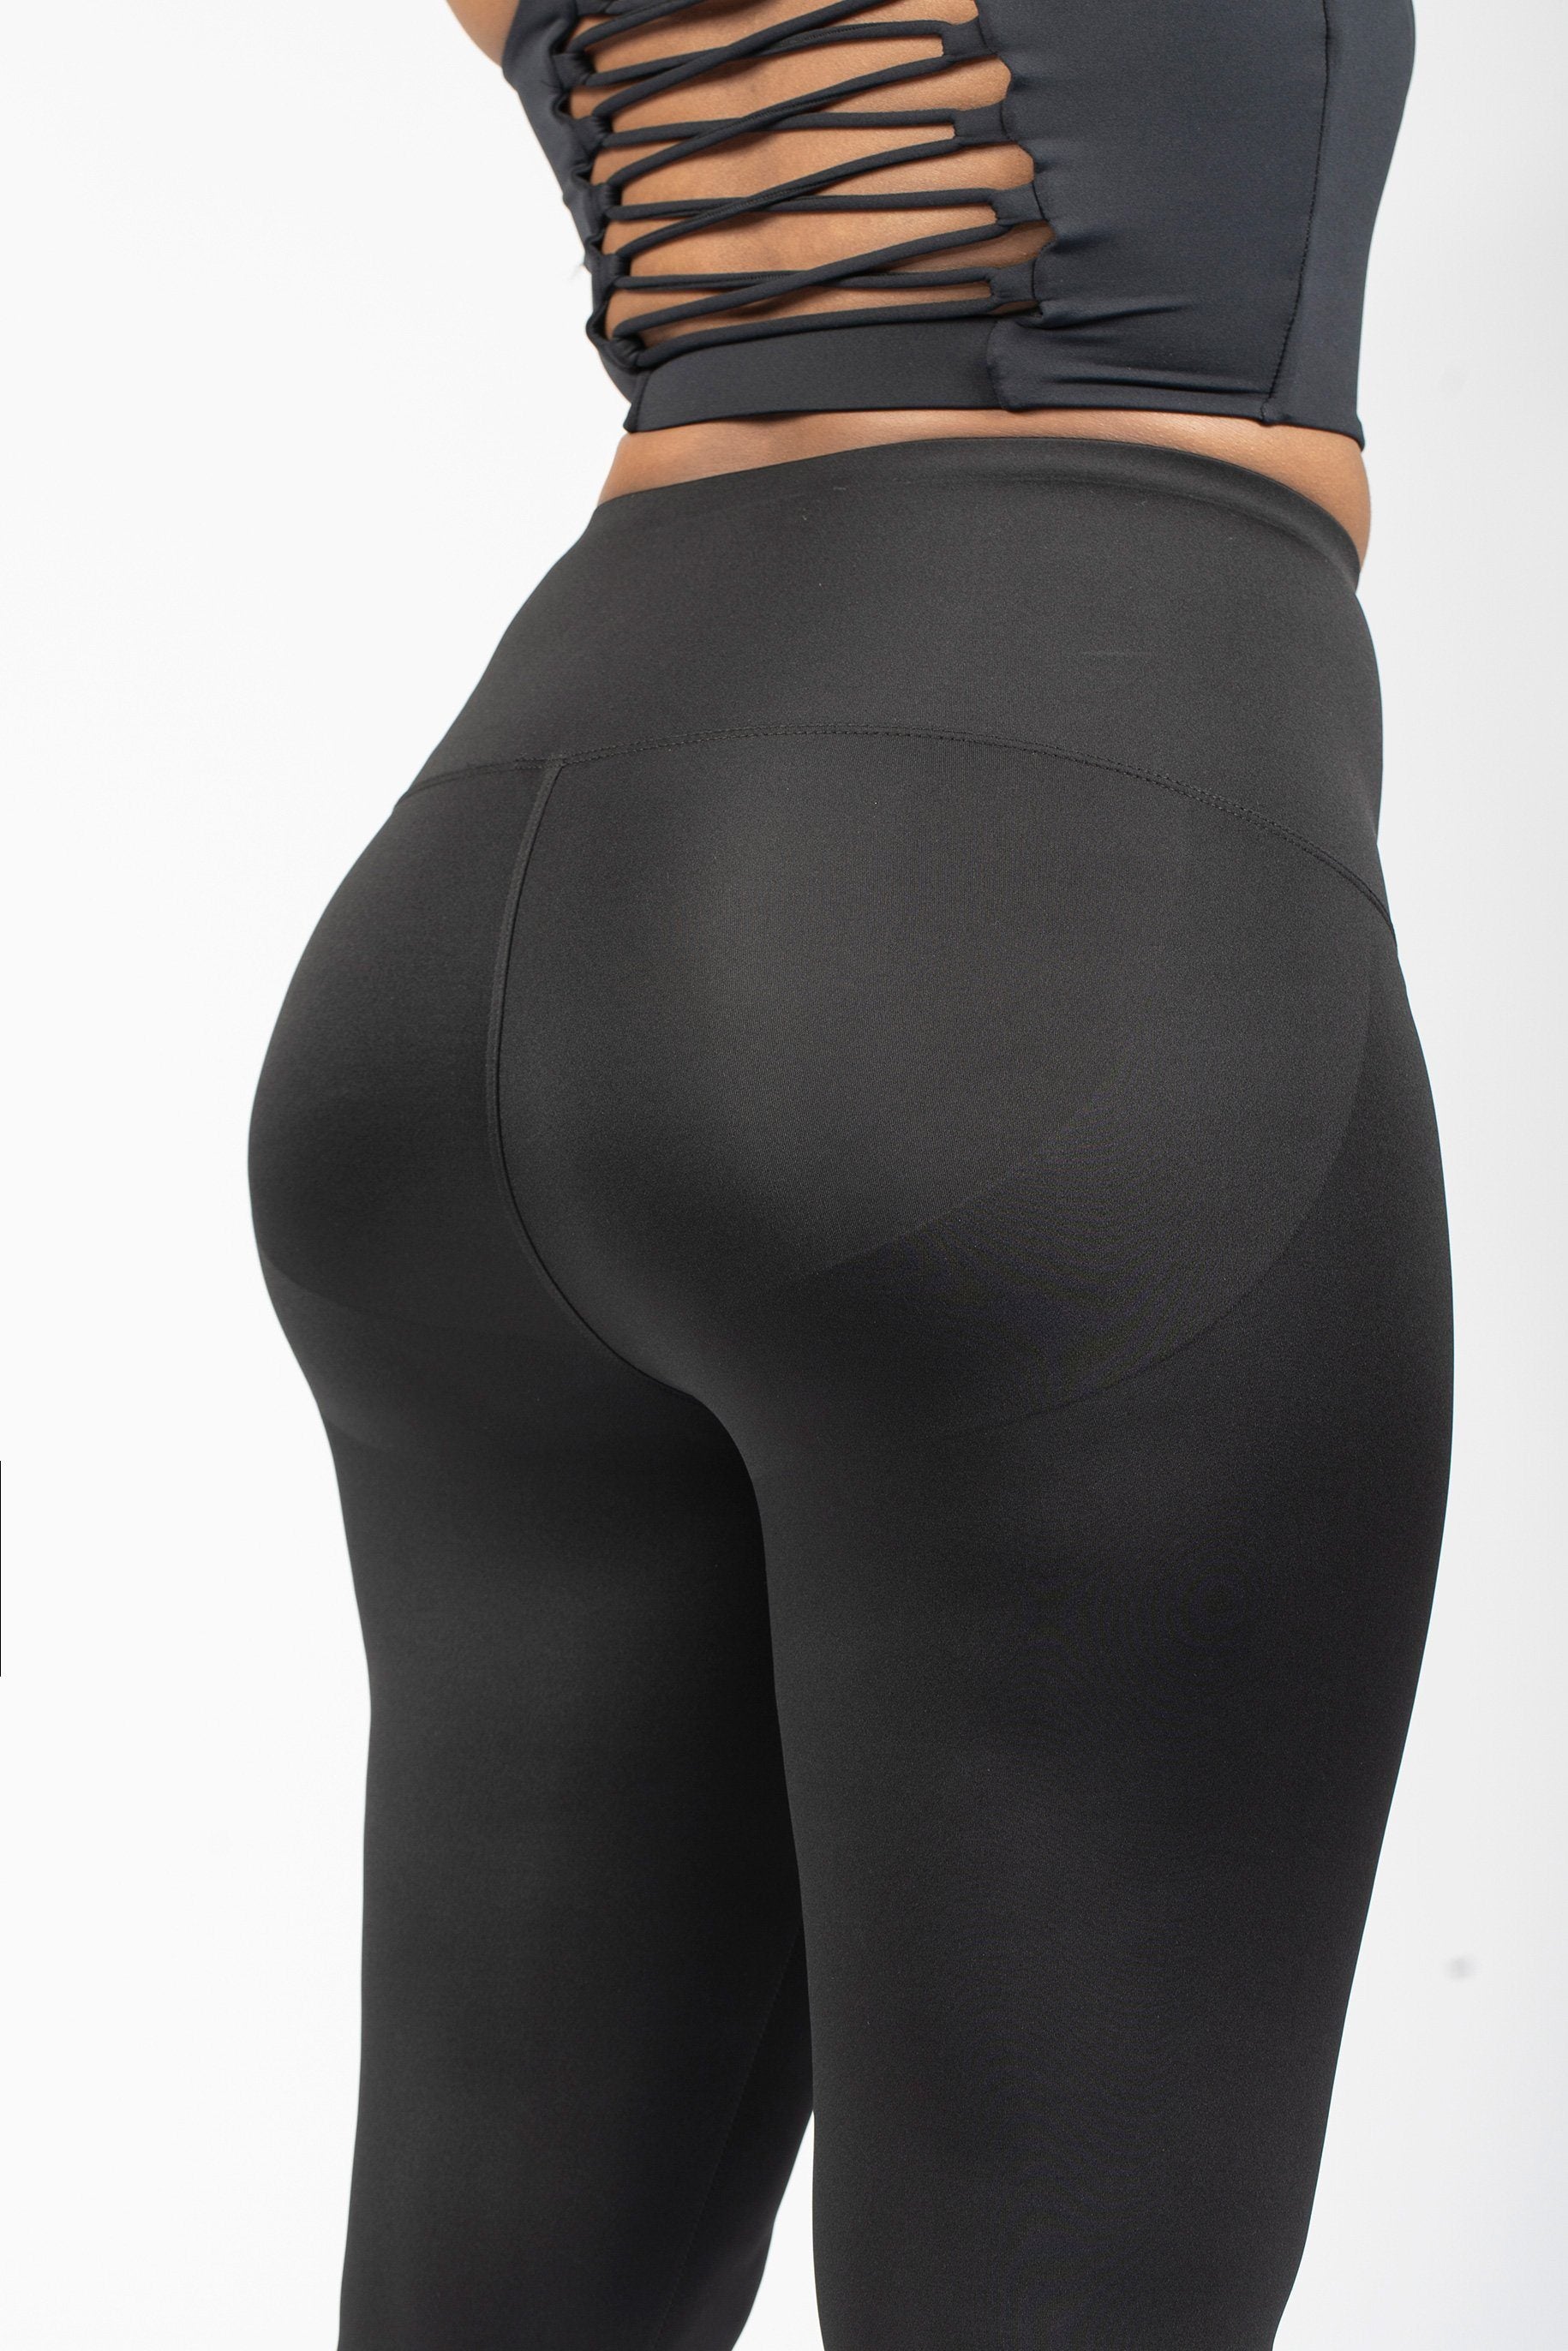 Maidenform Women's Firm Foundations Shapewear Leggings - Available